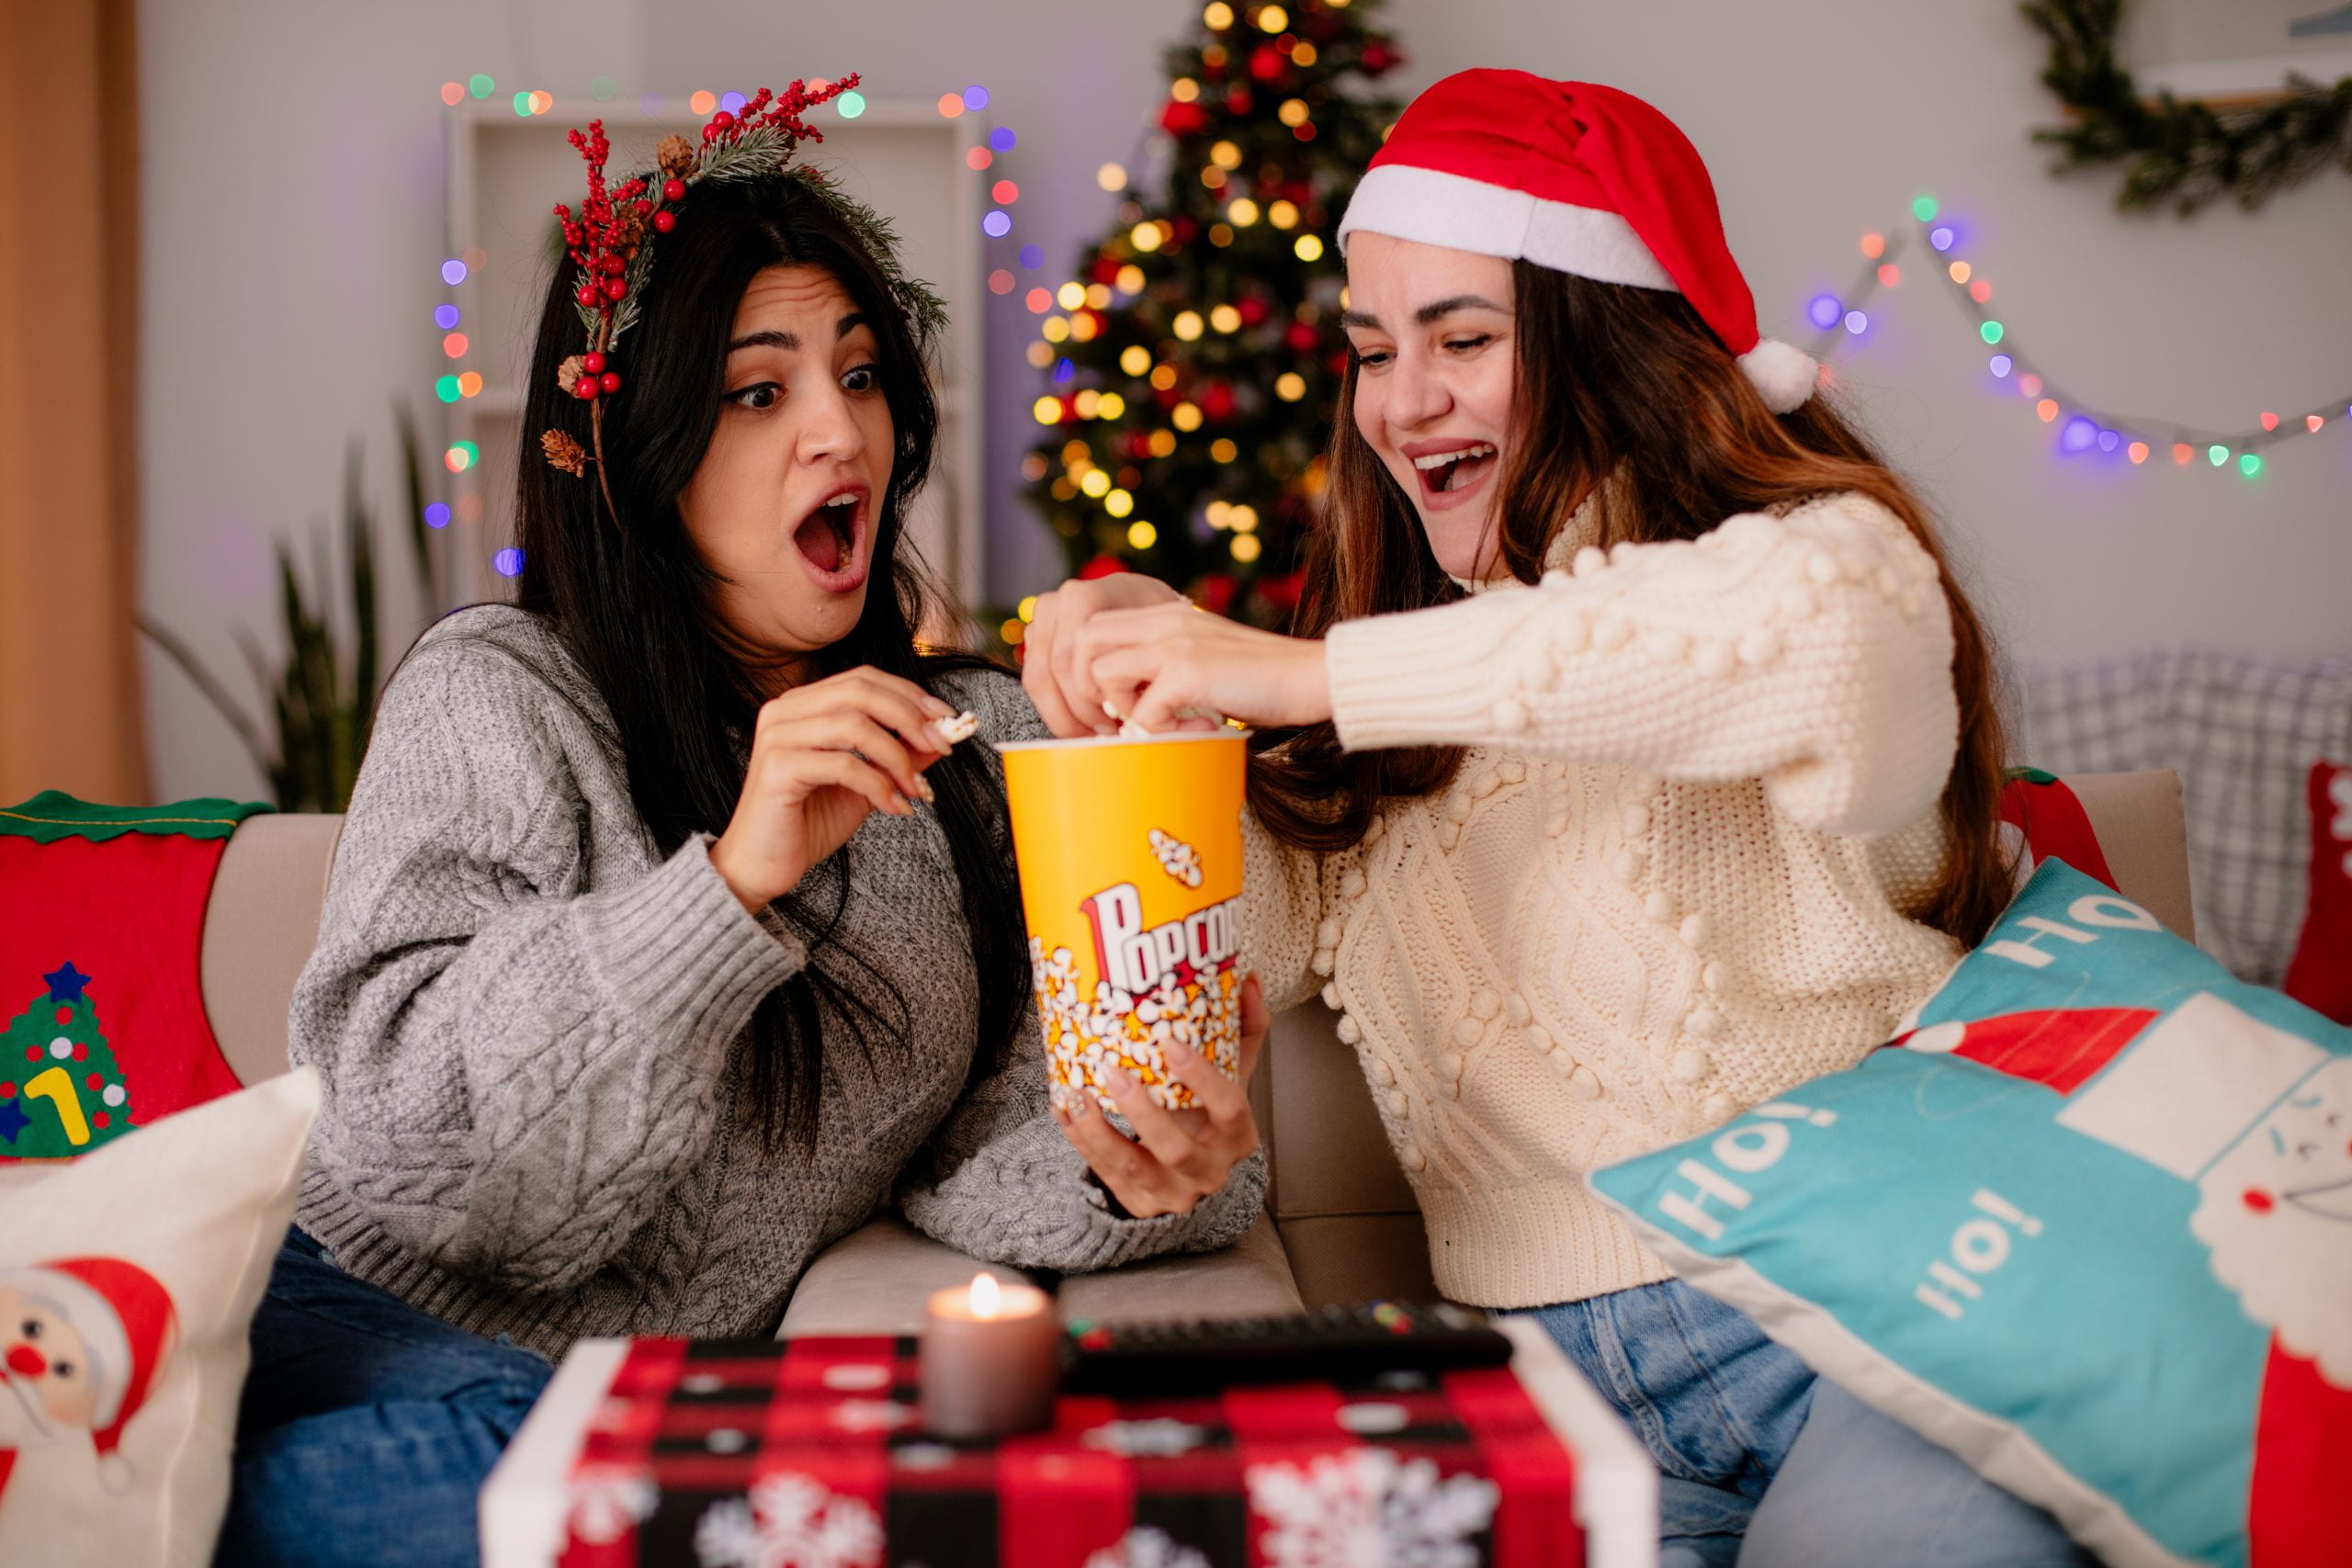 Two women having fun while eating popcorn and watching a movie with Christmas deco in the background.